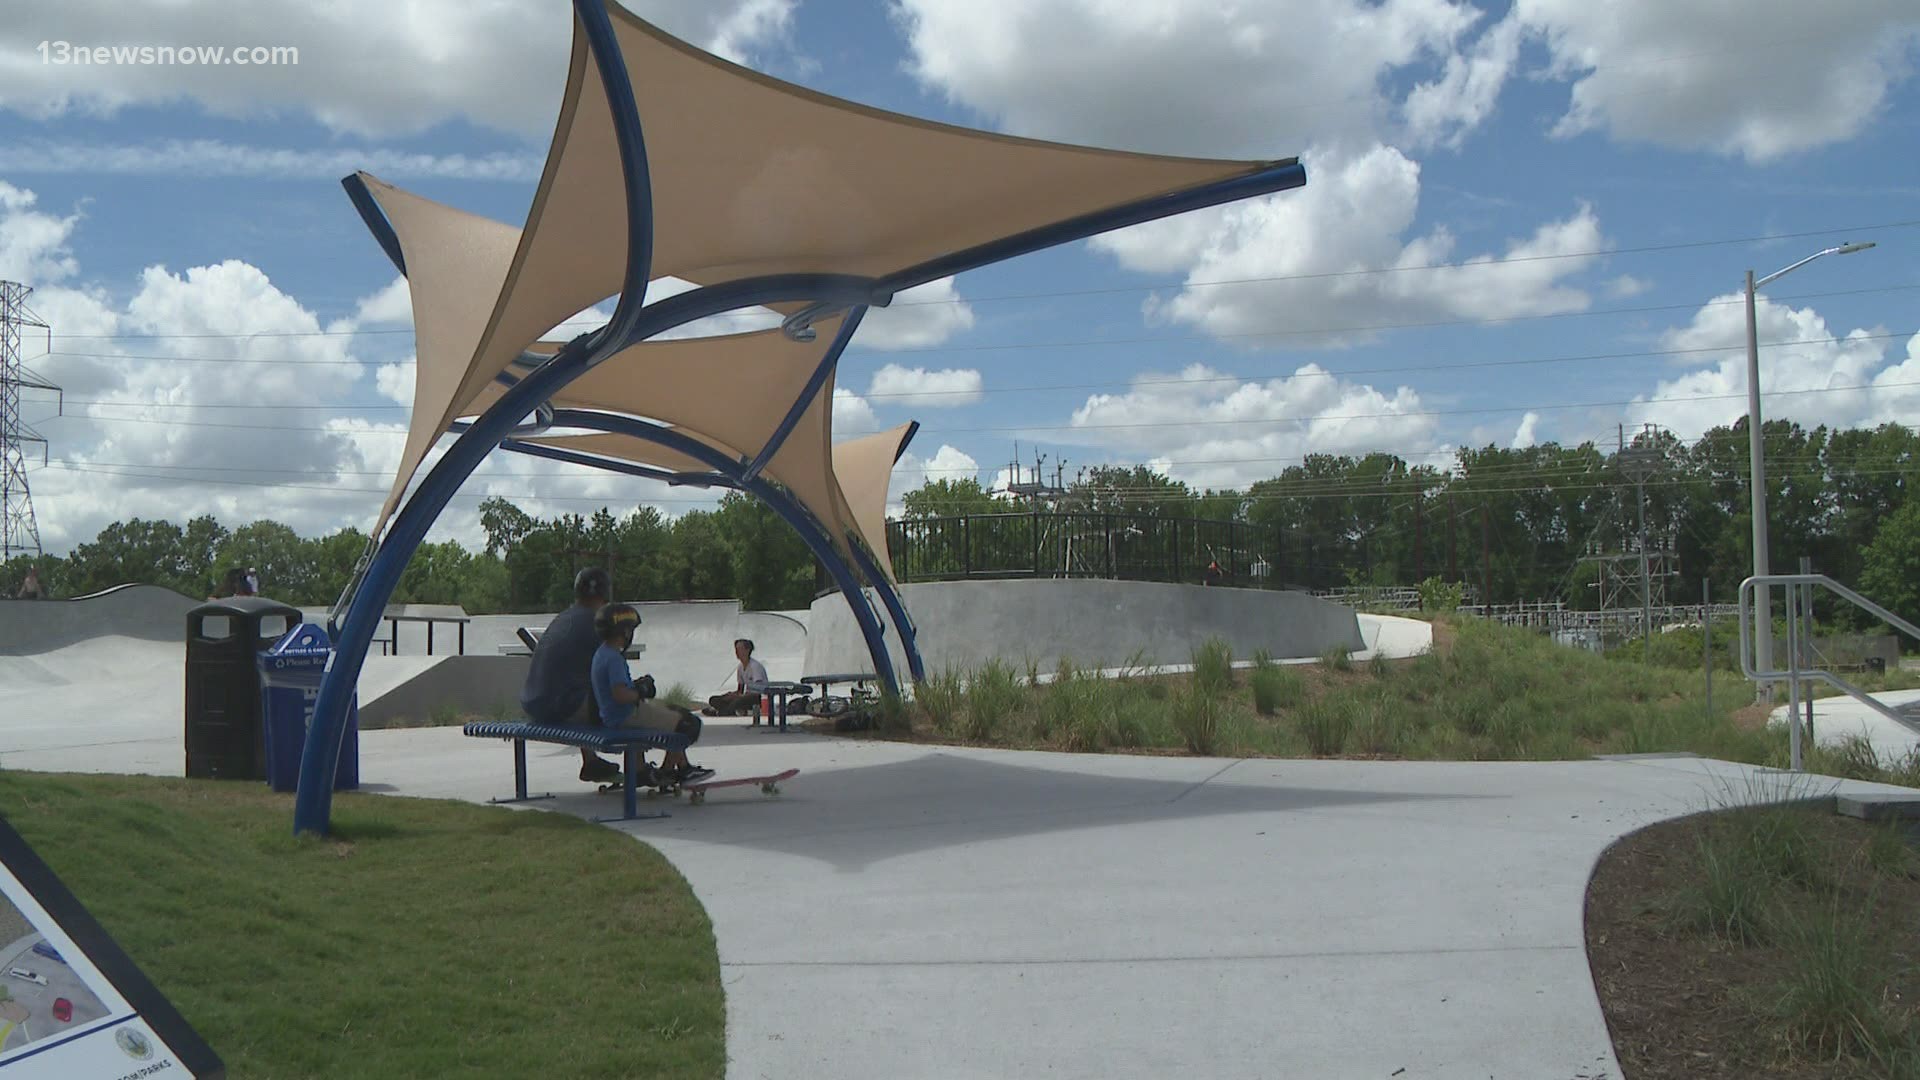 Woodstock Skate Park in Virginia Beach just opened and has an interesting back story.